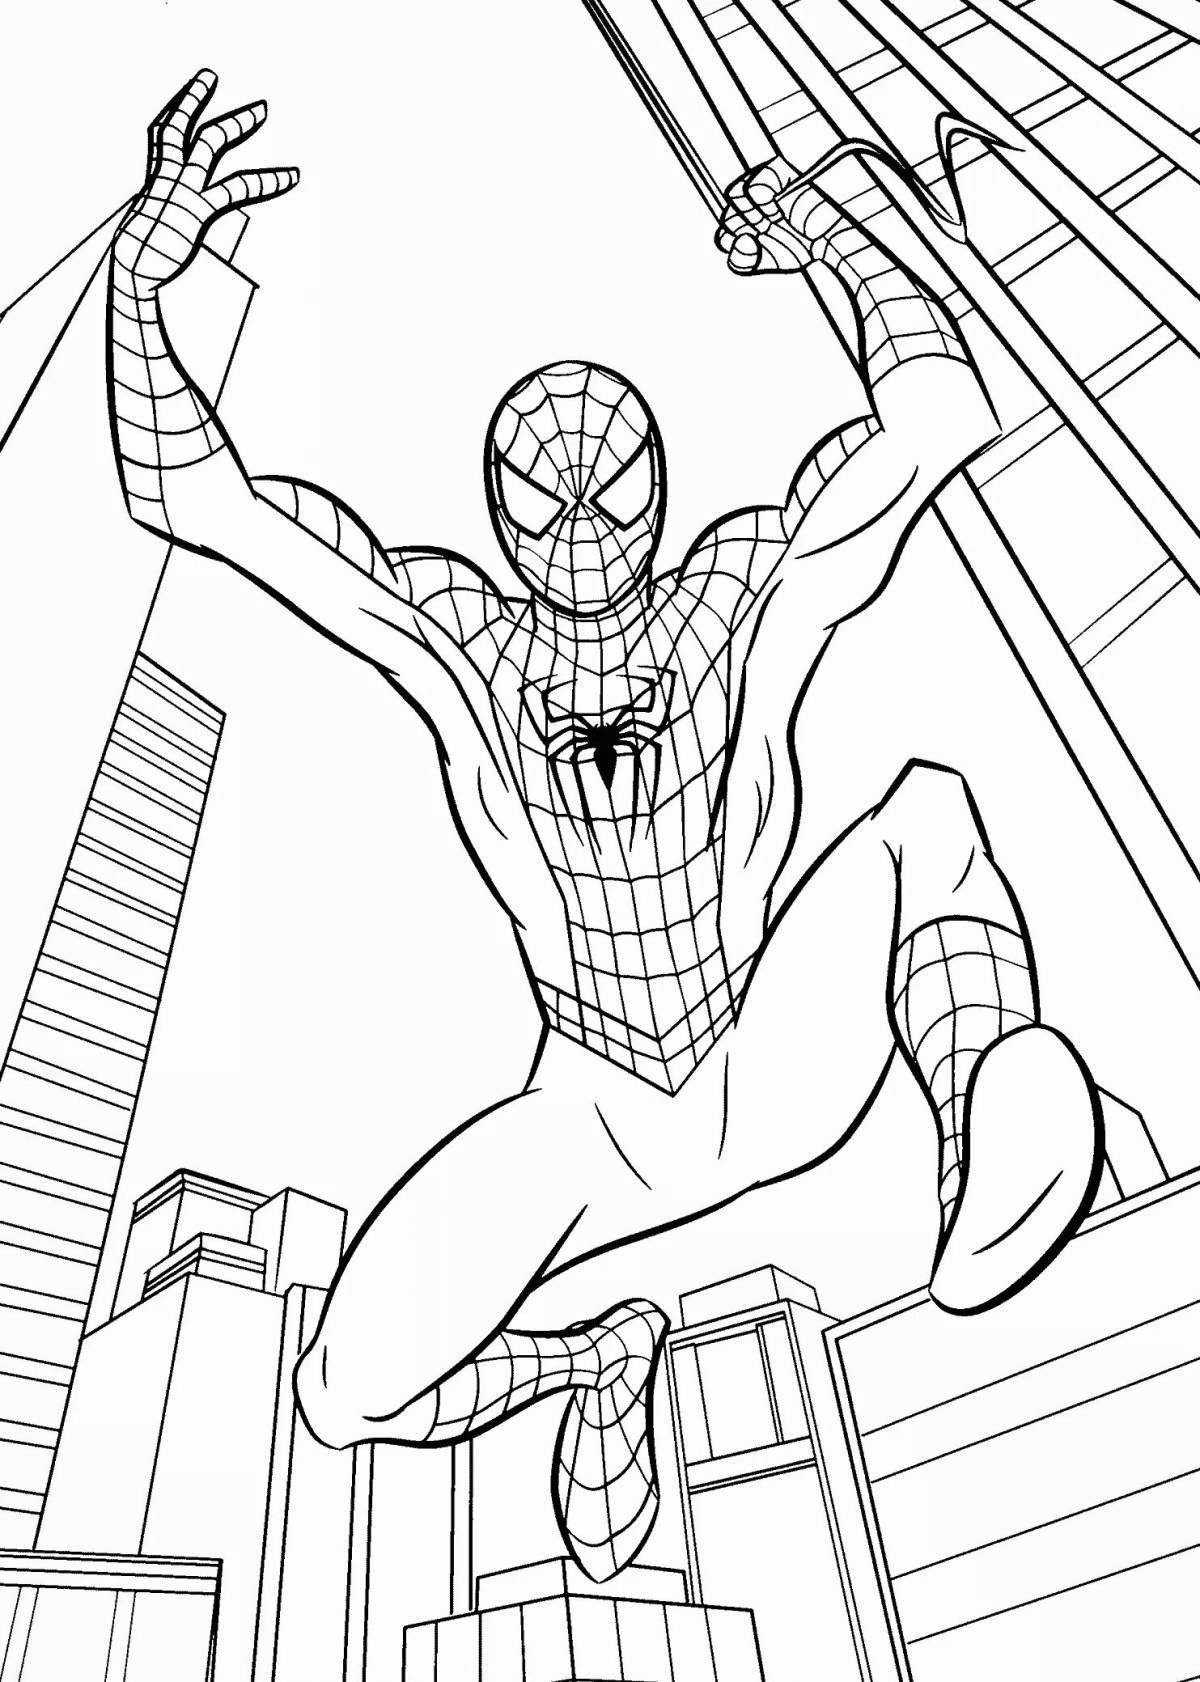 Marvel spider-man coloring page bold